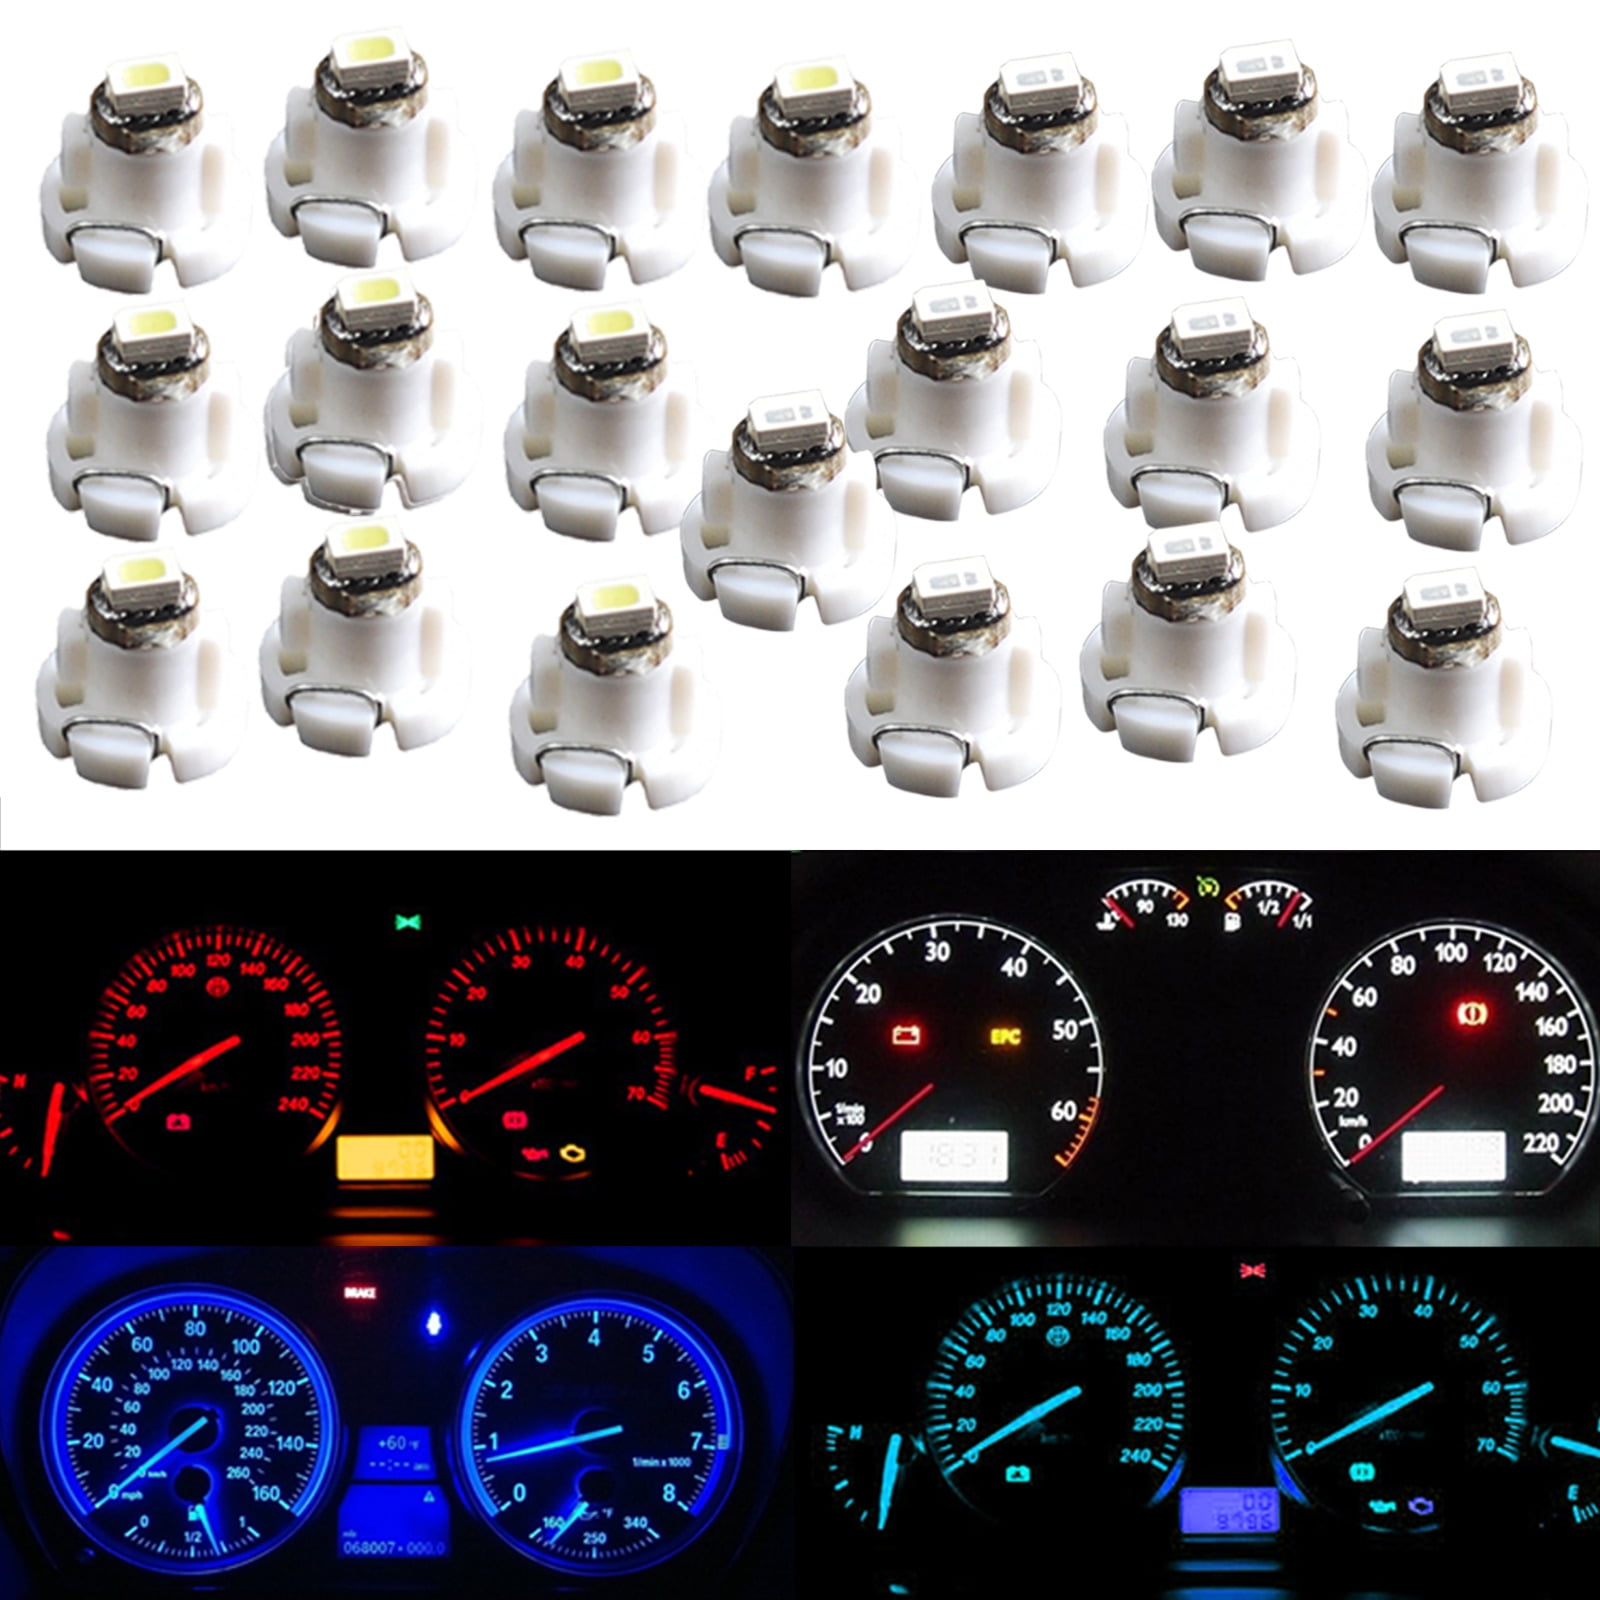 30X T3 Neo Wedge LED Instrument Cluster Panel Lamp Gauge Bulbs A/C Light Colors